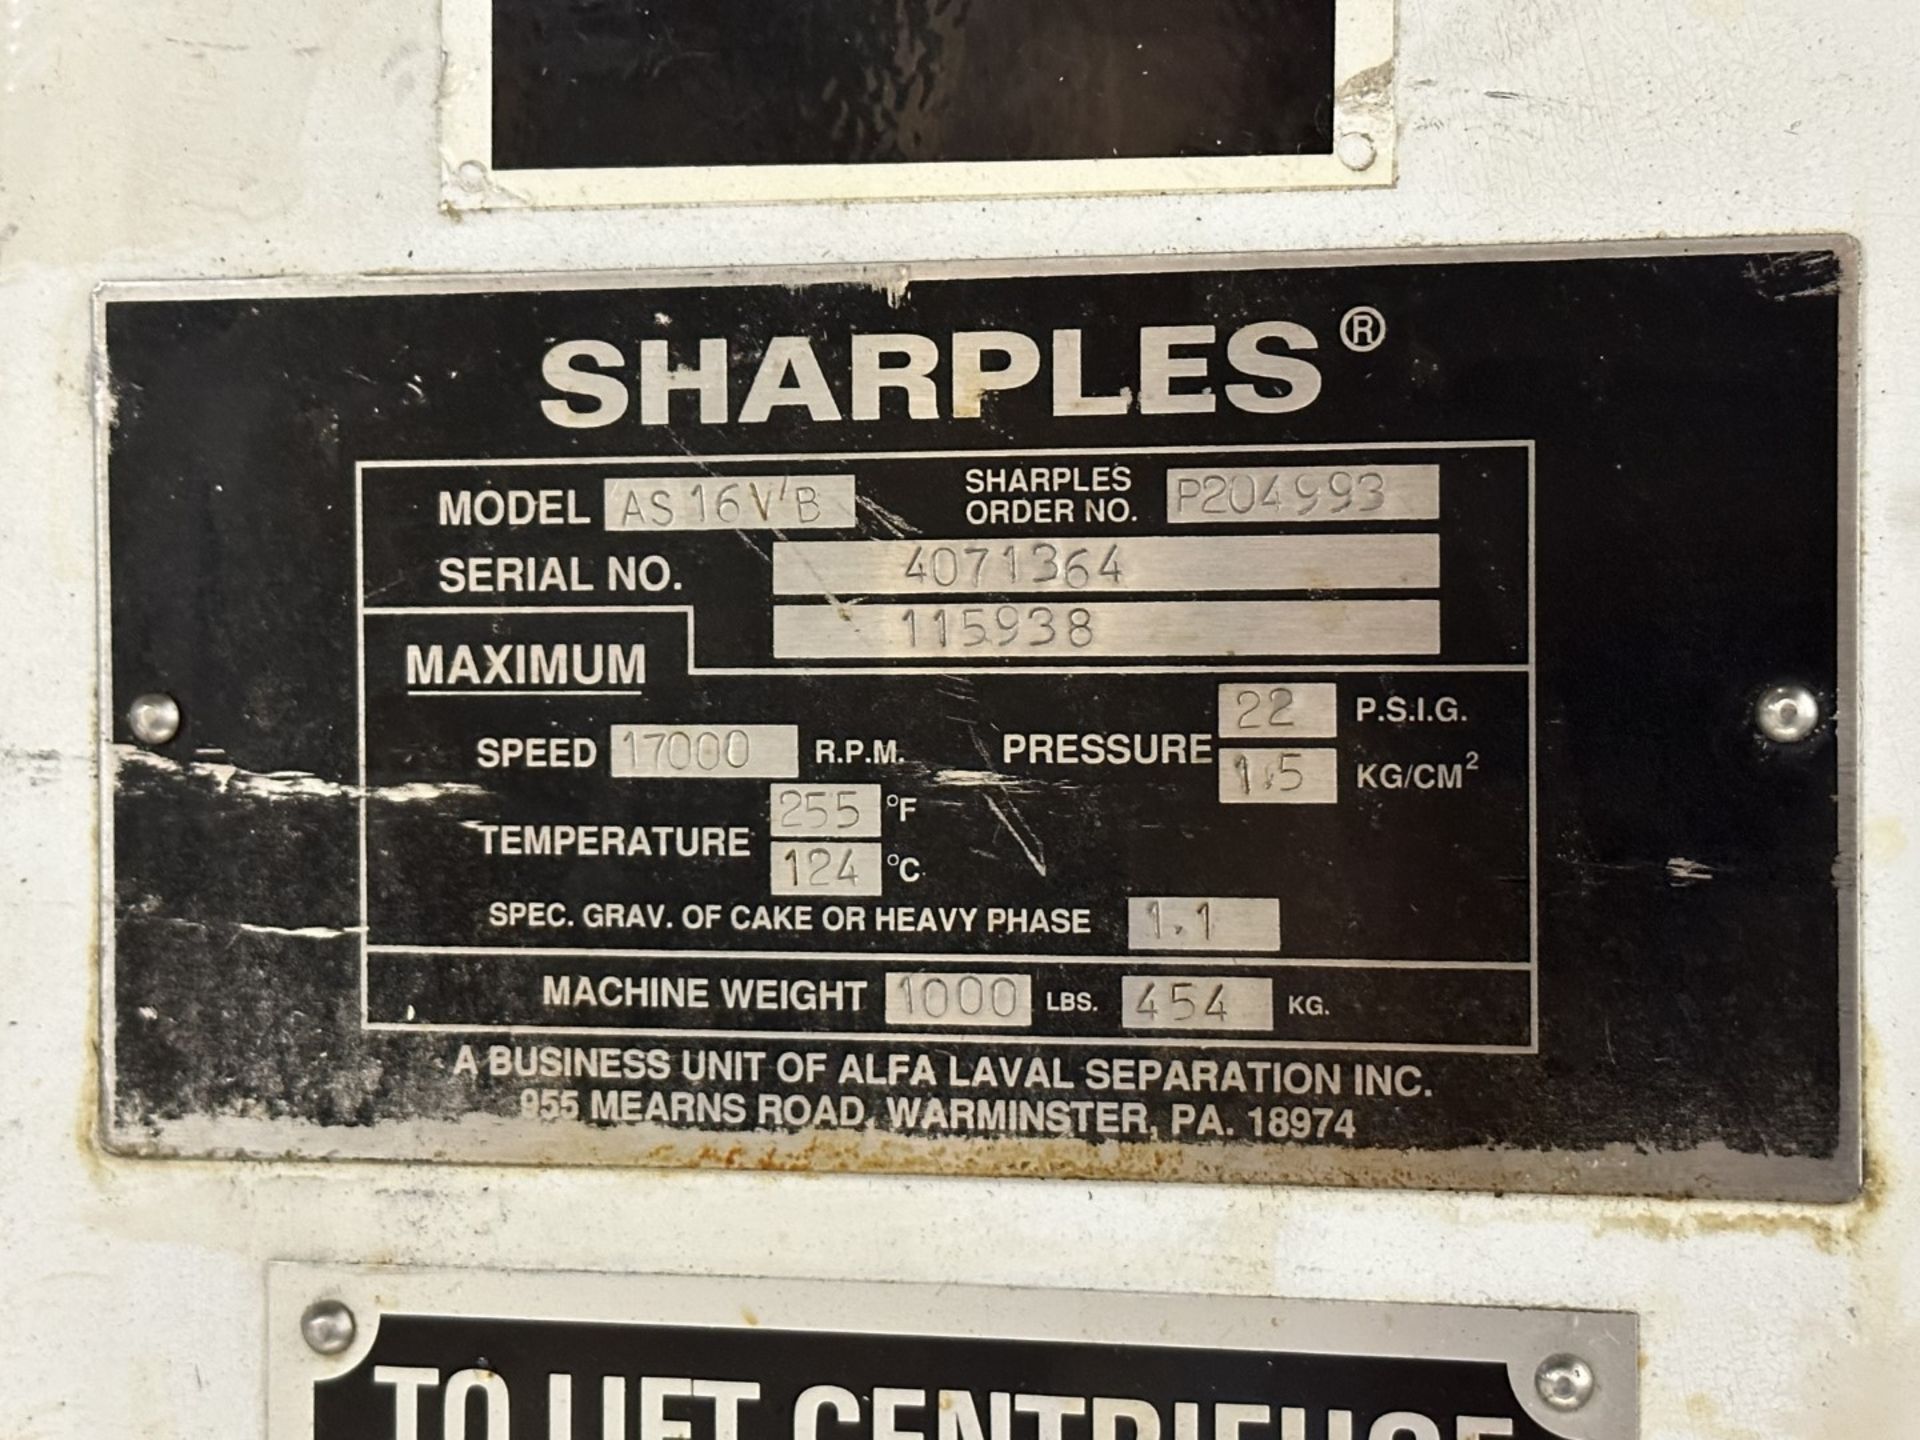 Sharples vaporite super centrifuge, model AS16VB, stainless steel construction, 17000 RPM max speed, - Image 19 of 20